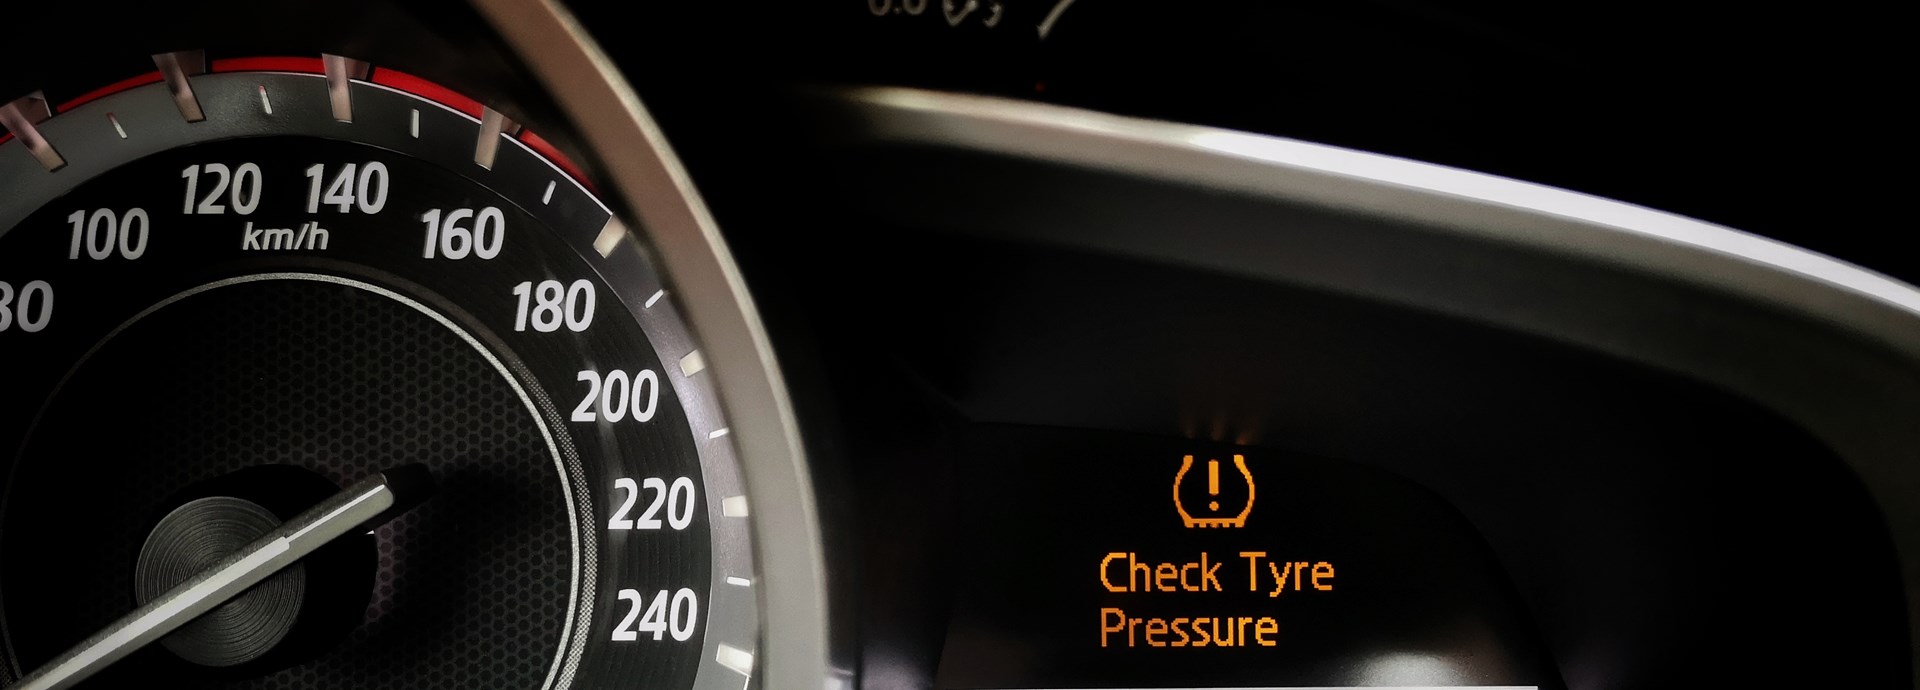 car dashboard is highlighting the check tyre pressure light is on